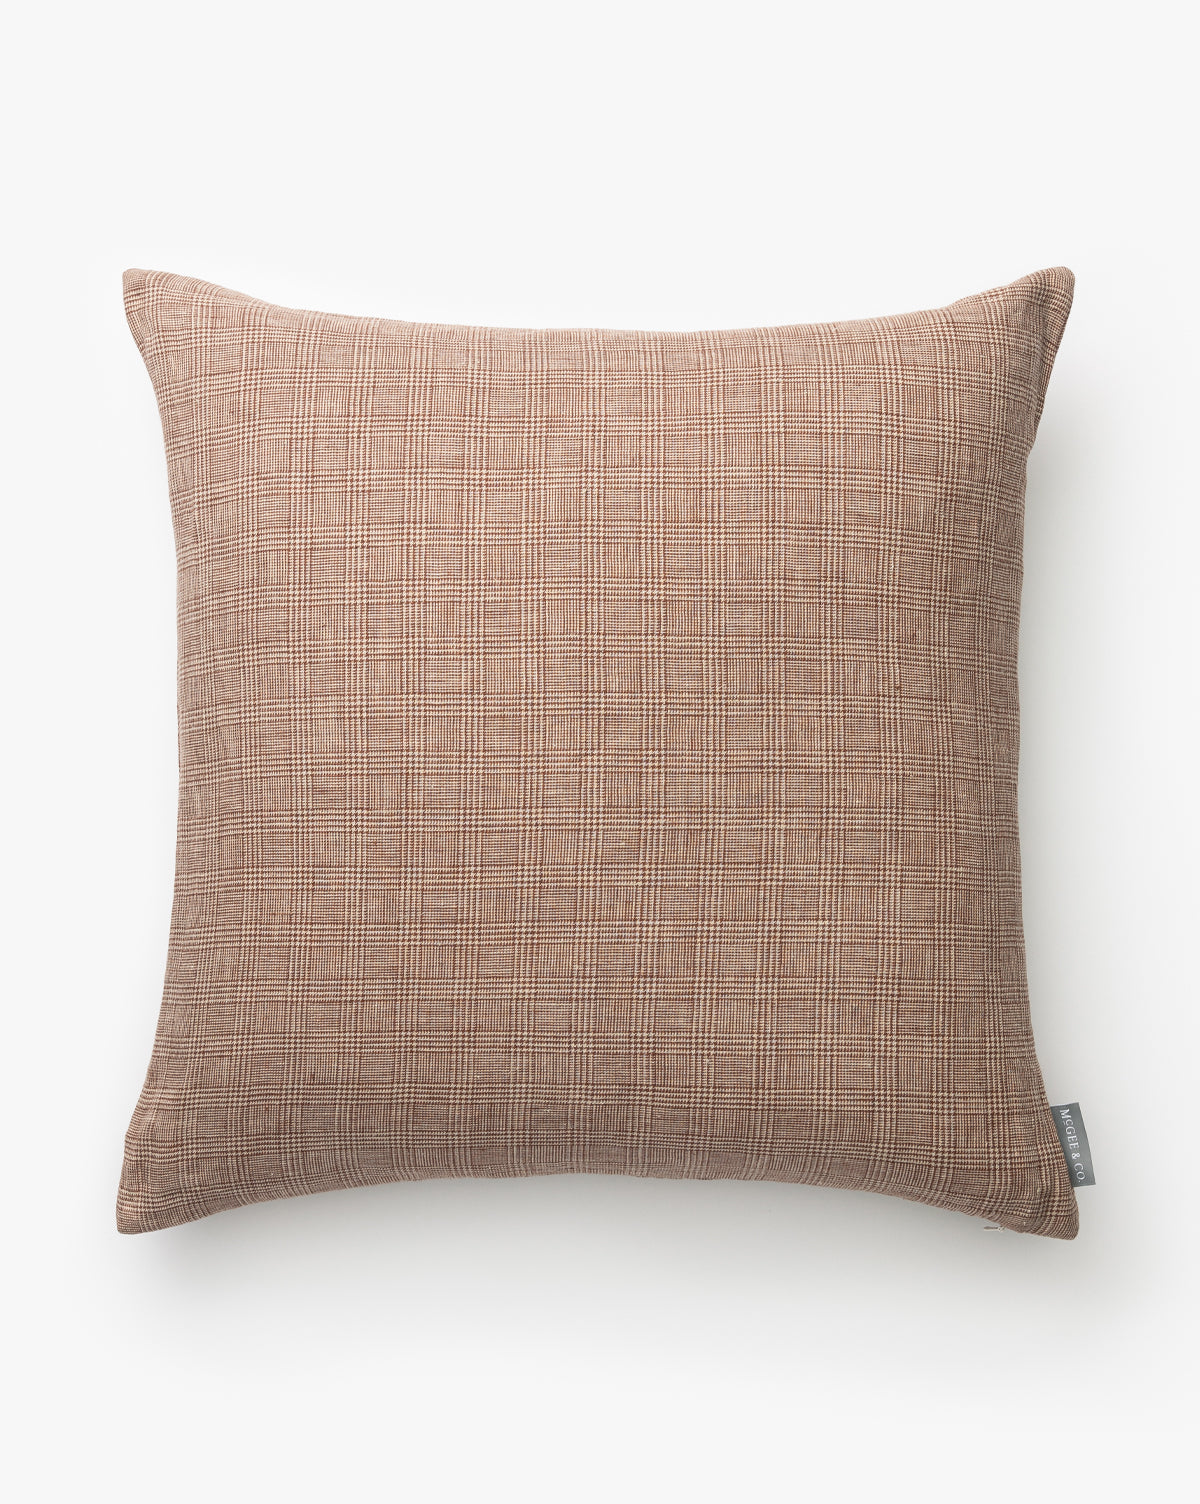 Narayan Industries Global Limited, Polly Pillow Cover